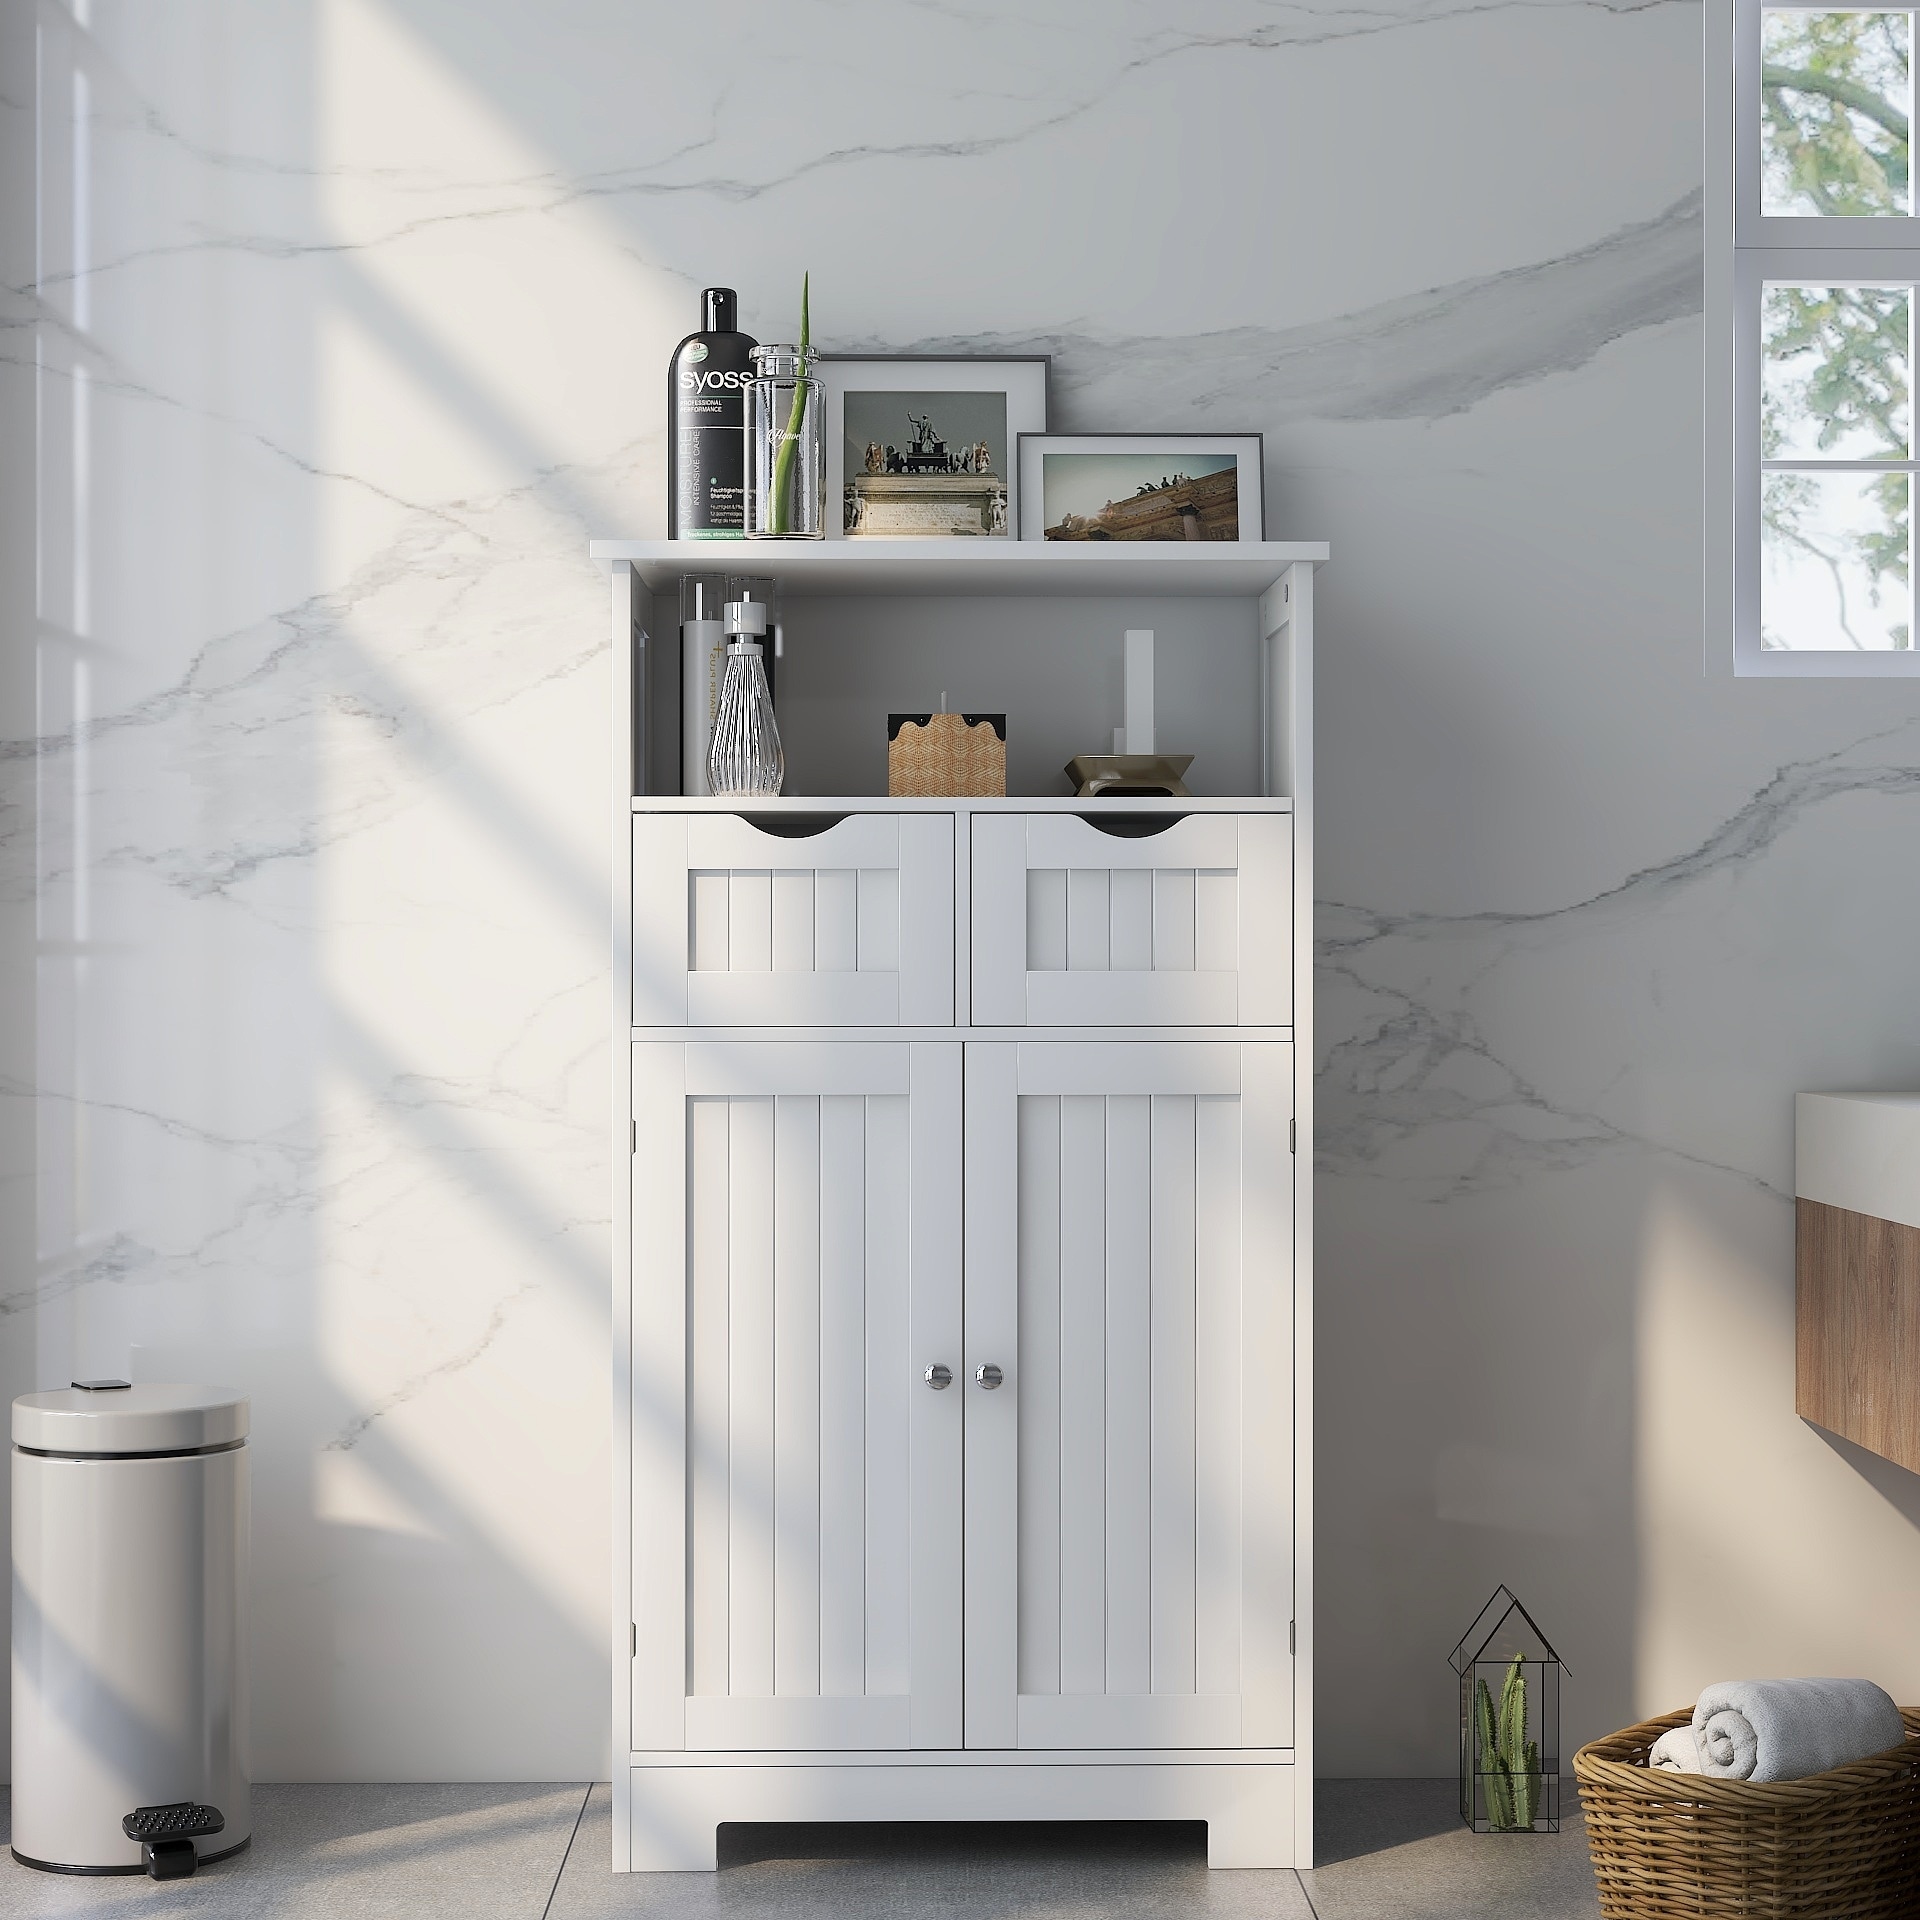 https://ak1.ostkcdn.com/images/products/is/images/direct/7ec5de5d35acae159a2438769ad667c17d10e48e/Bathroom-Cabinet%2C-Storage-Cabinet-with-2-Drawers-%26-2-Shutter-Doors%2C-Free-Standing-Floor-Cabinet-with-Adjustable-Shelf.jpg